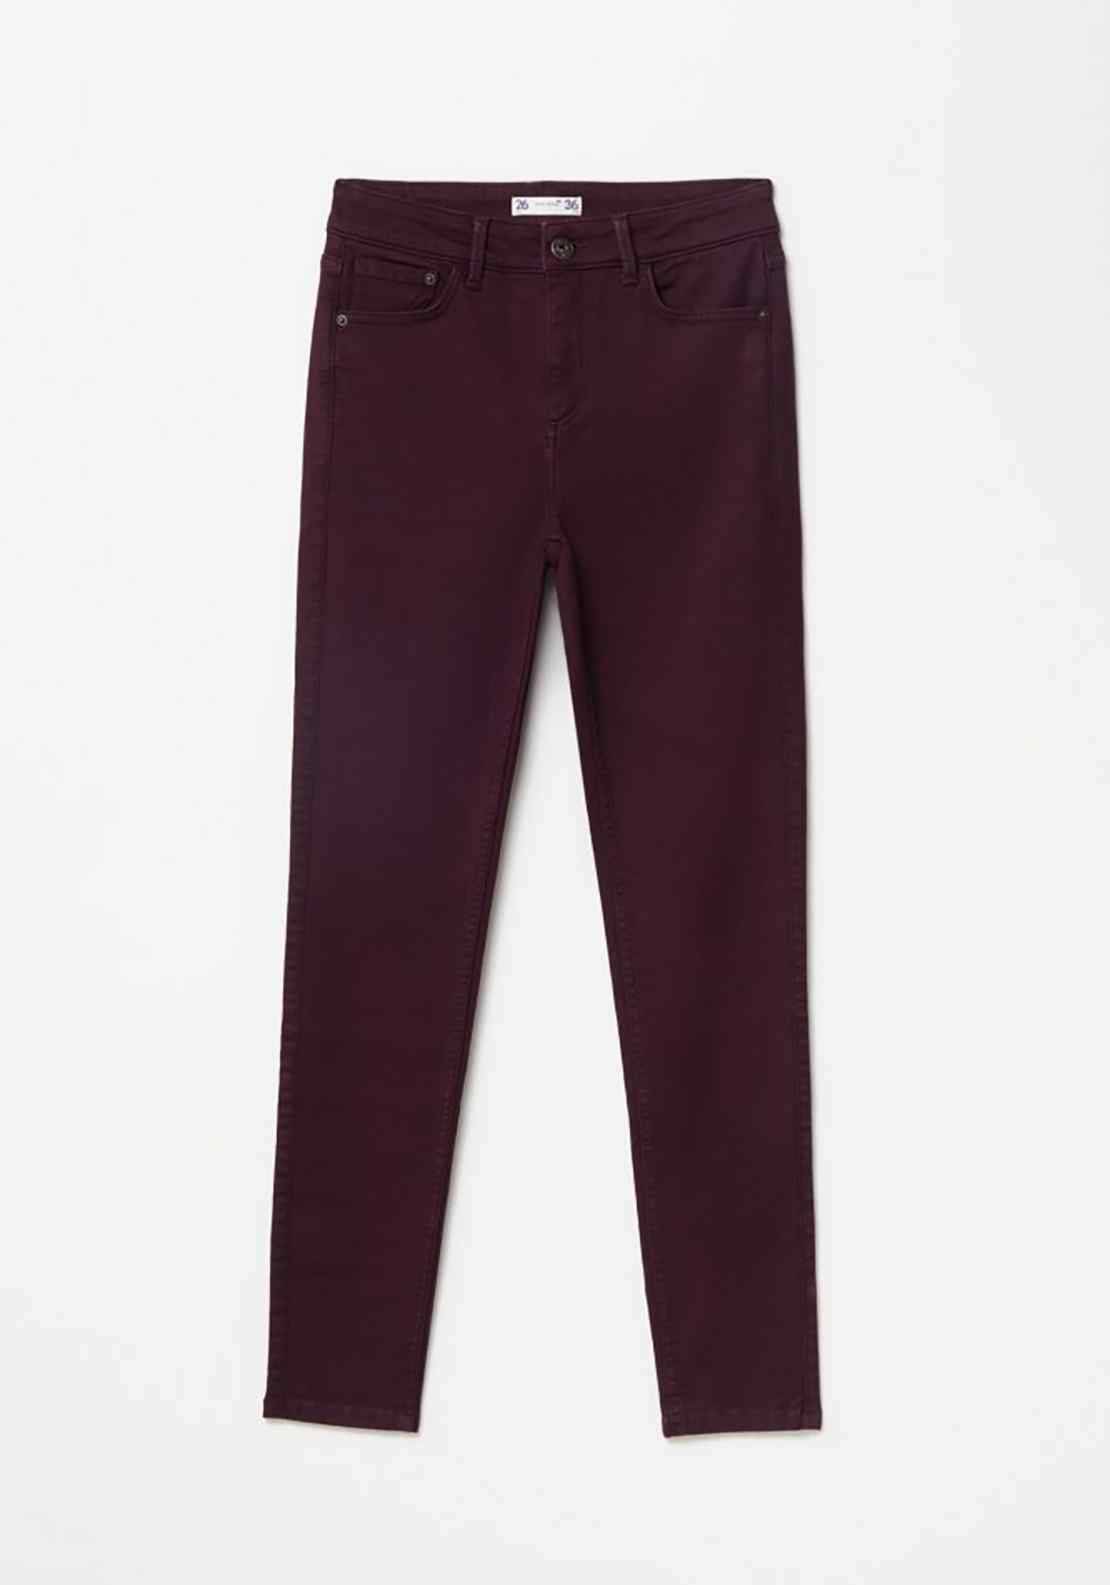 Sfera Skinny Jeans - Wine 8 Shaws Department Stores